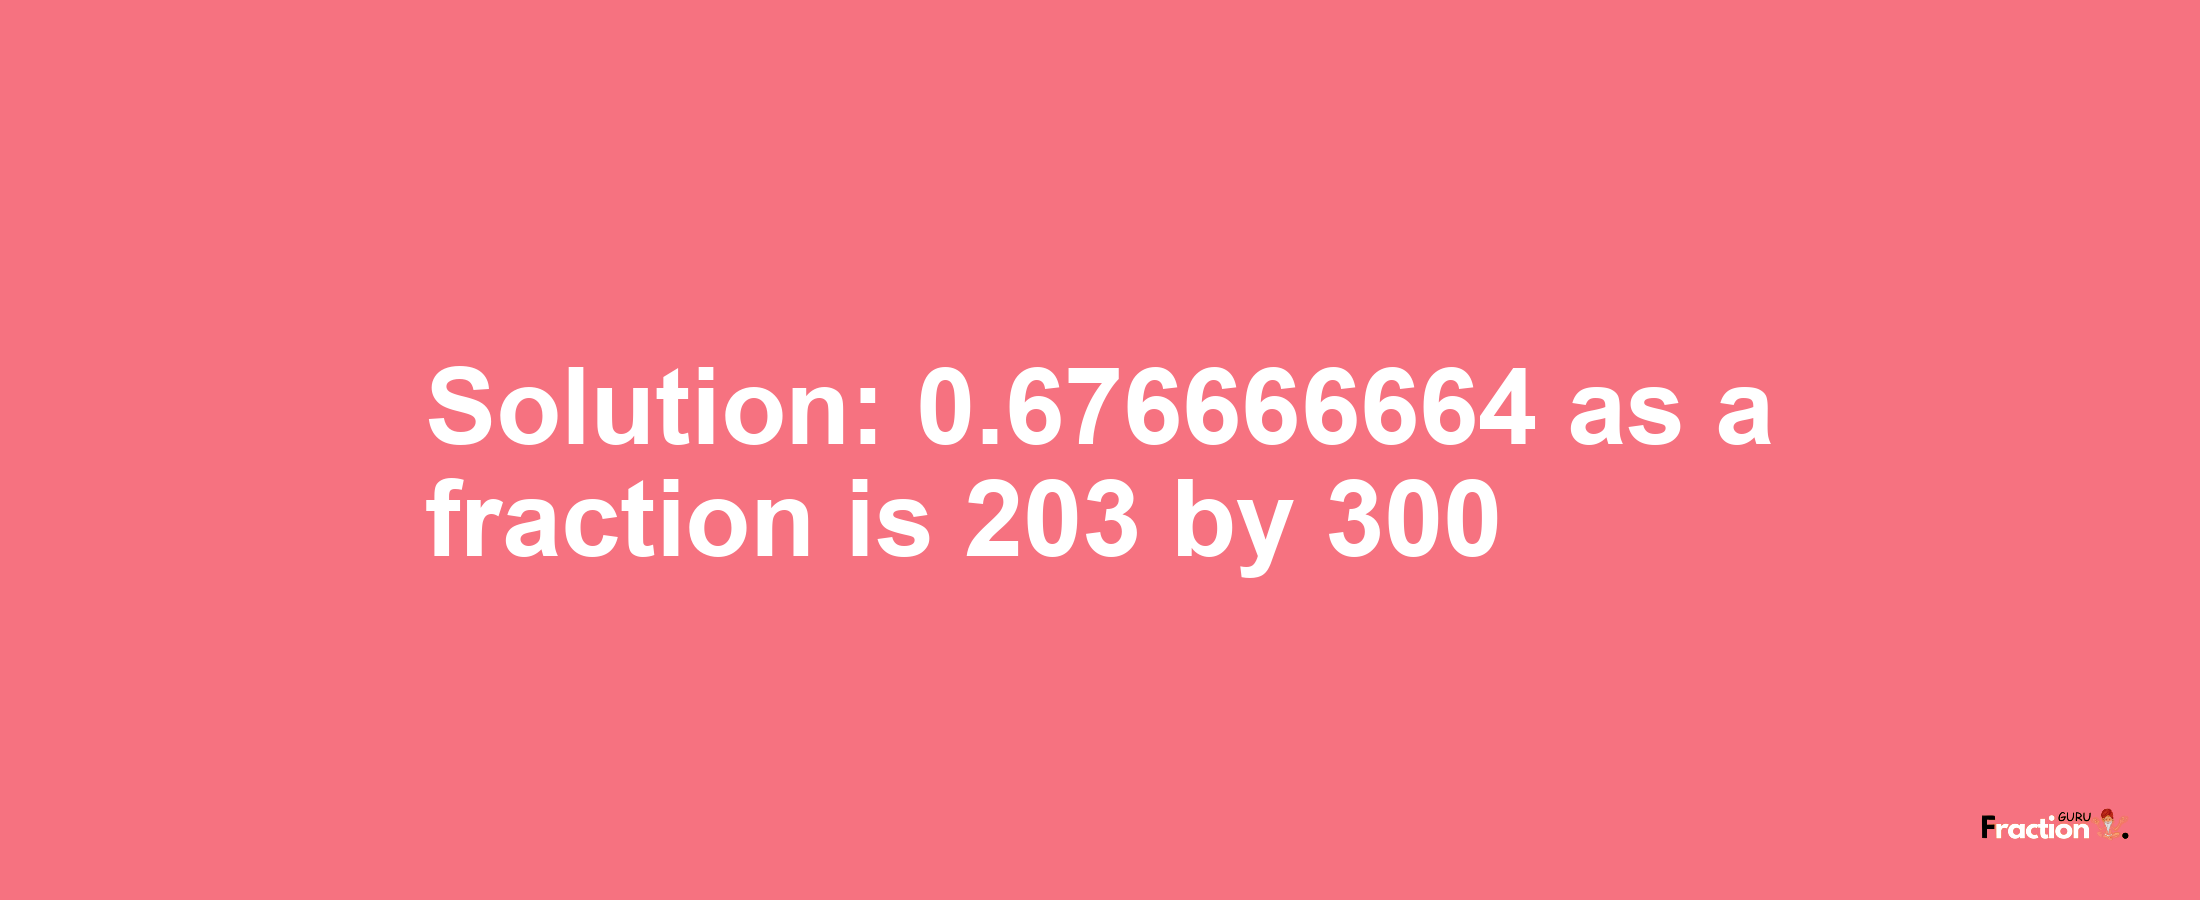 Solution:0.676666664 as a fraction is 203/300